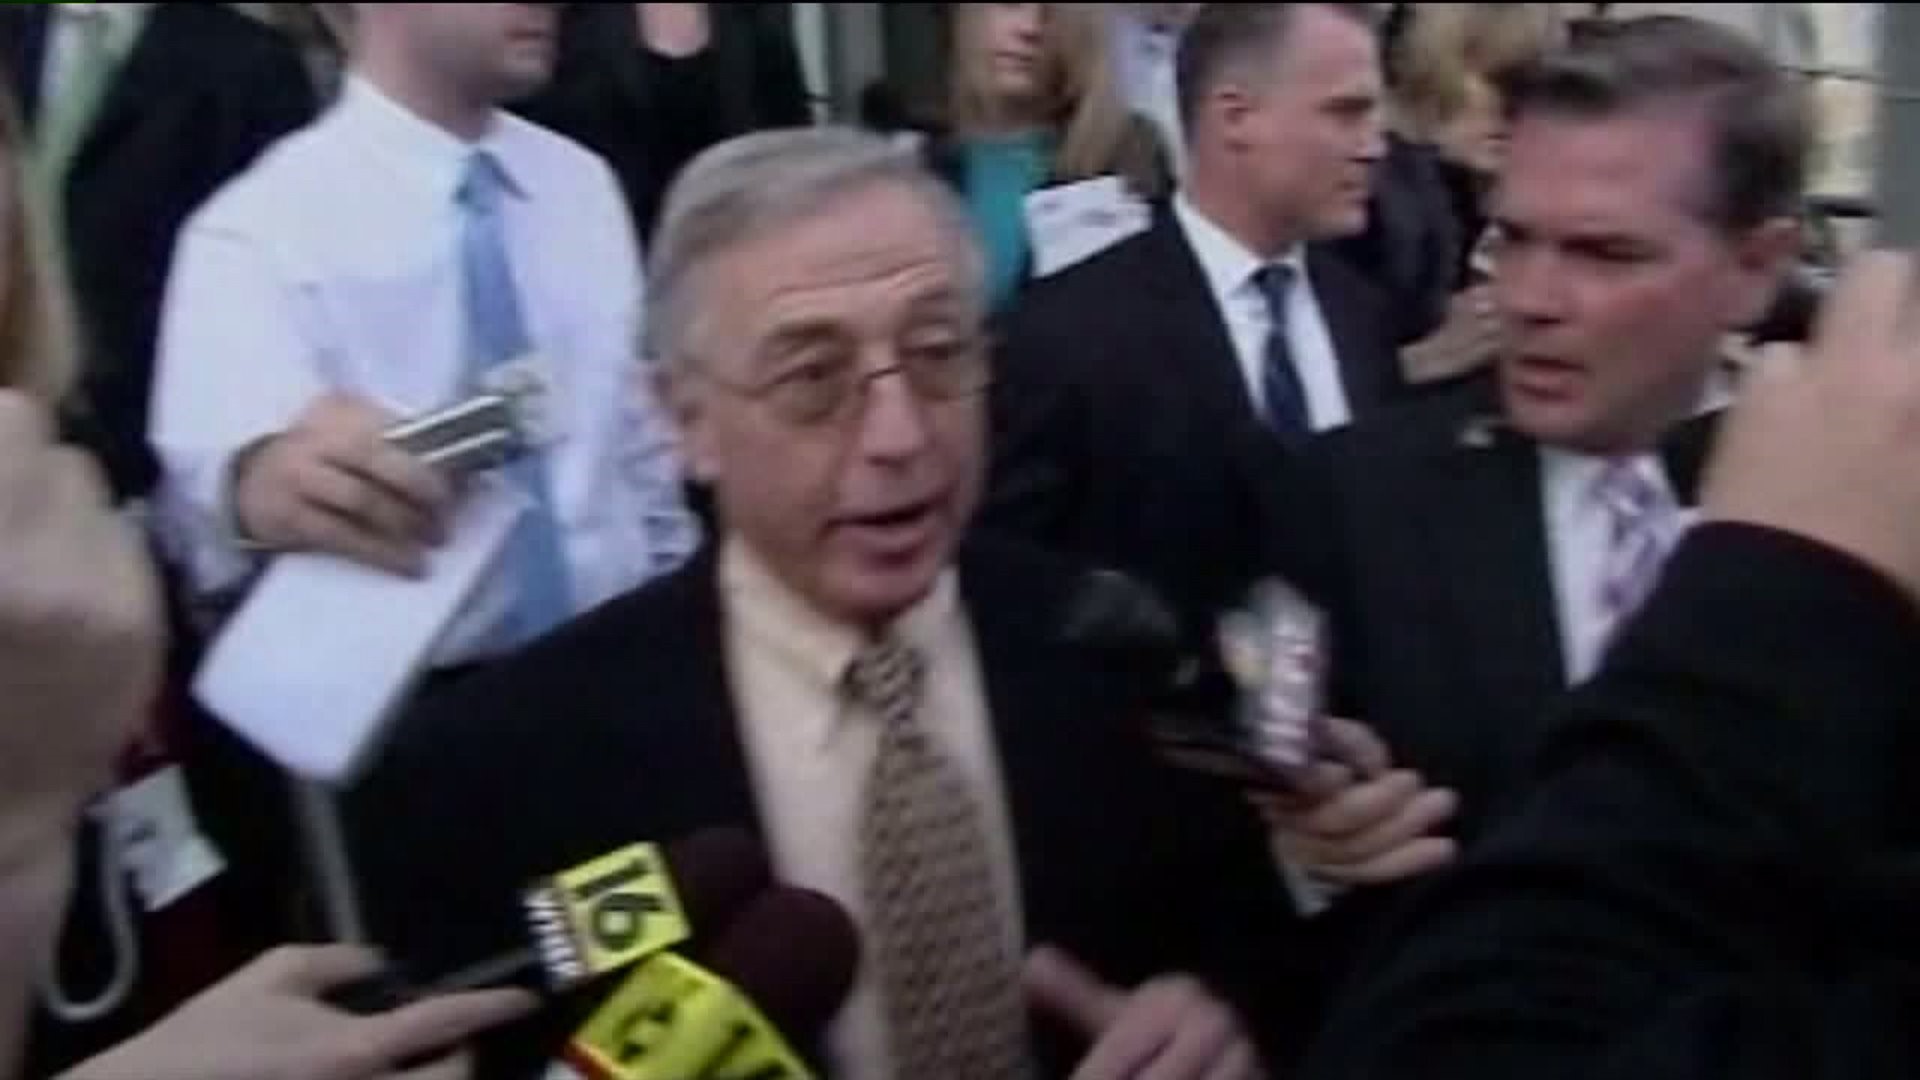 Some Convictions Against Former Judge Ciavarella Vacated